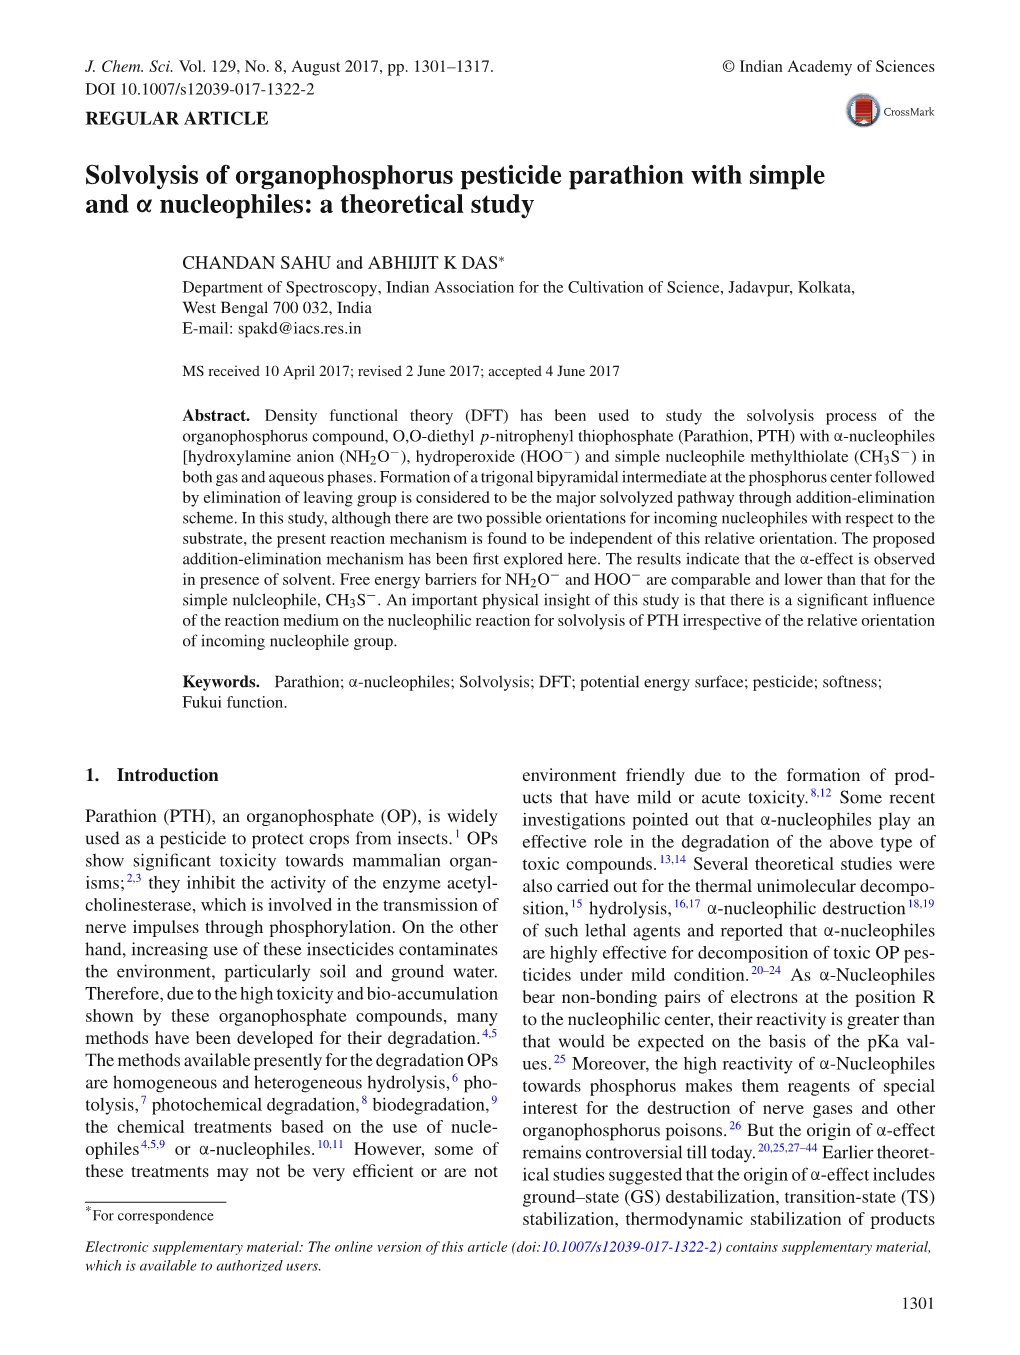 Solvolysis of Organophosphorus Pesticide Parathion with Simple and Α Nucleophiles: a Theoretical Study